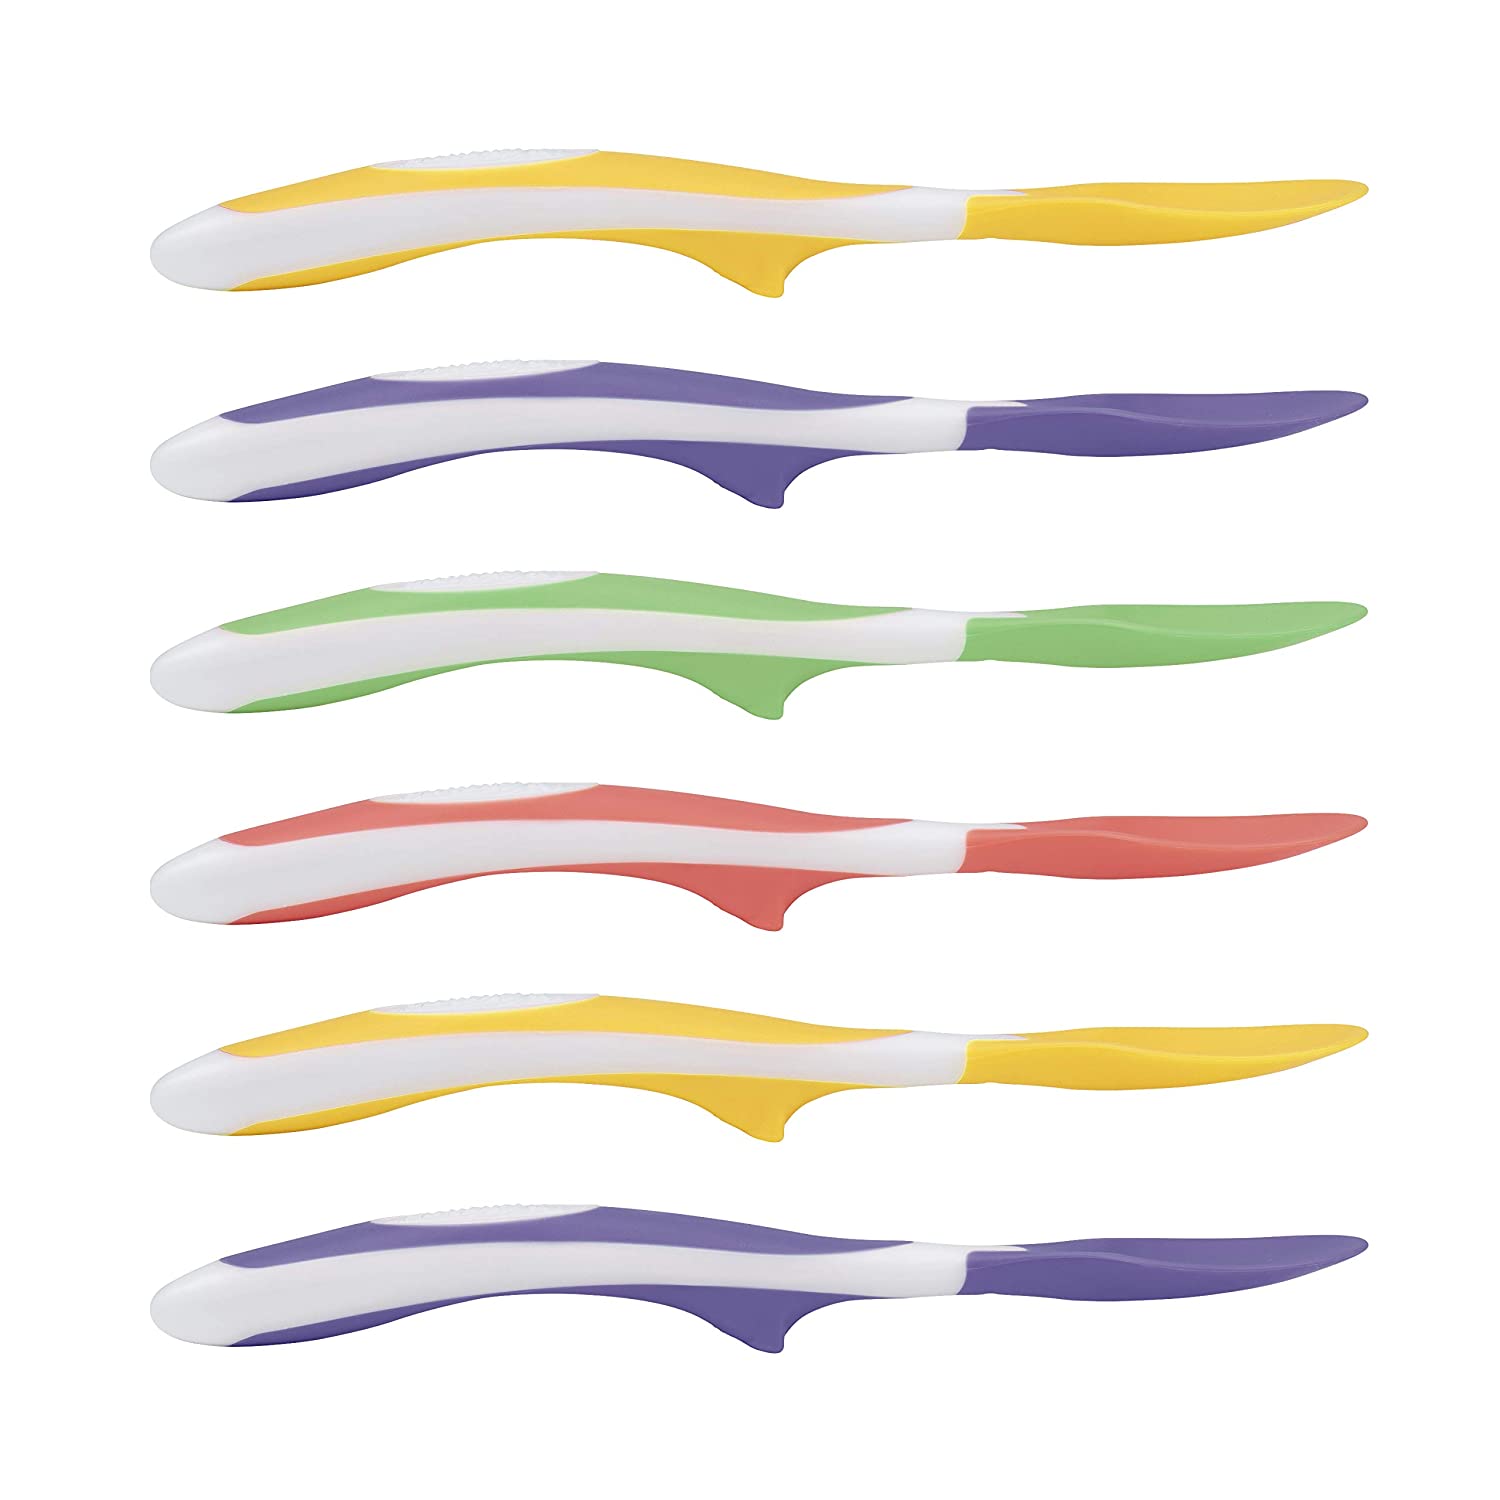 Dr Browns Soft-Tip Spoon, 4-Pack (Yellow, Green, Purple, Red)